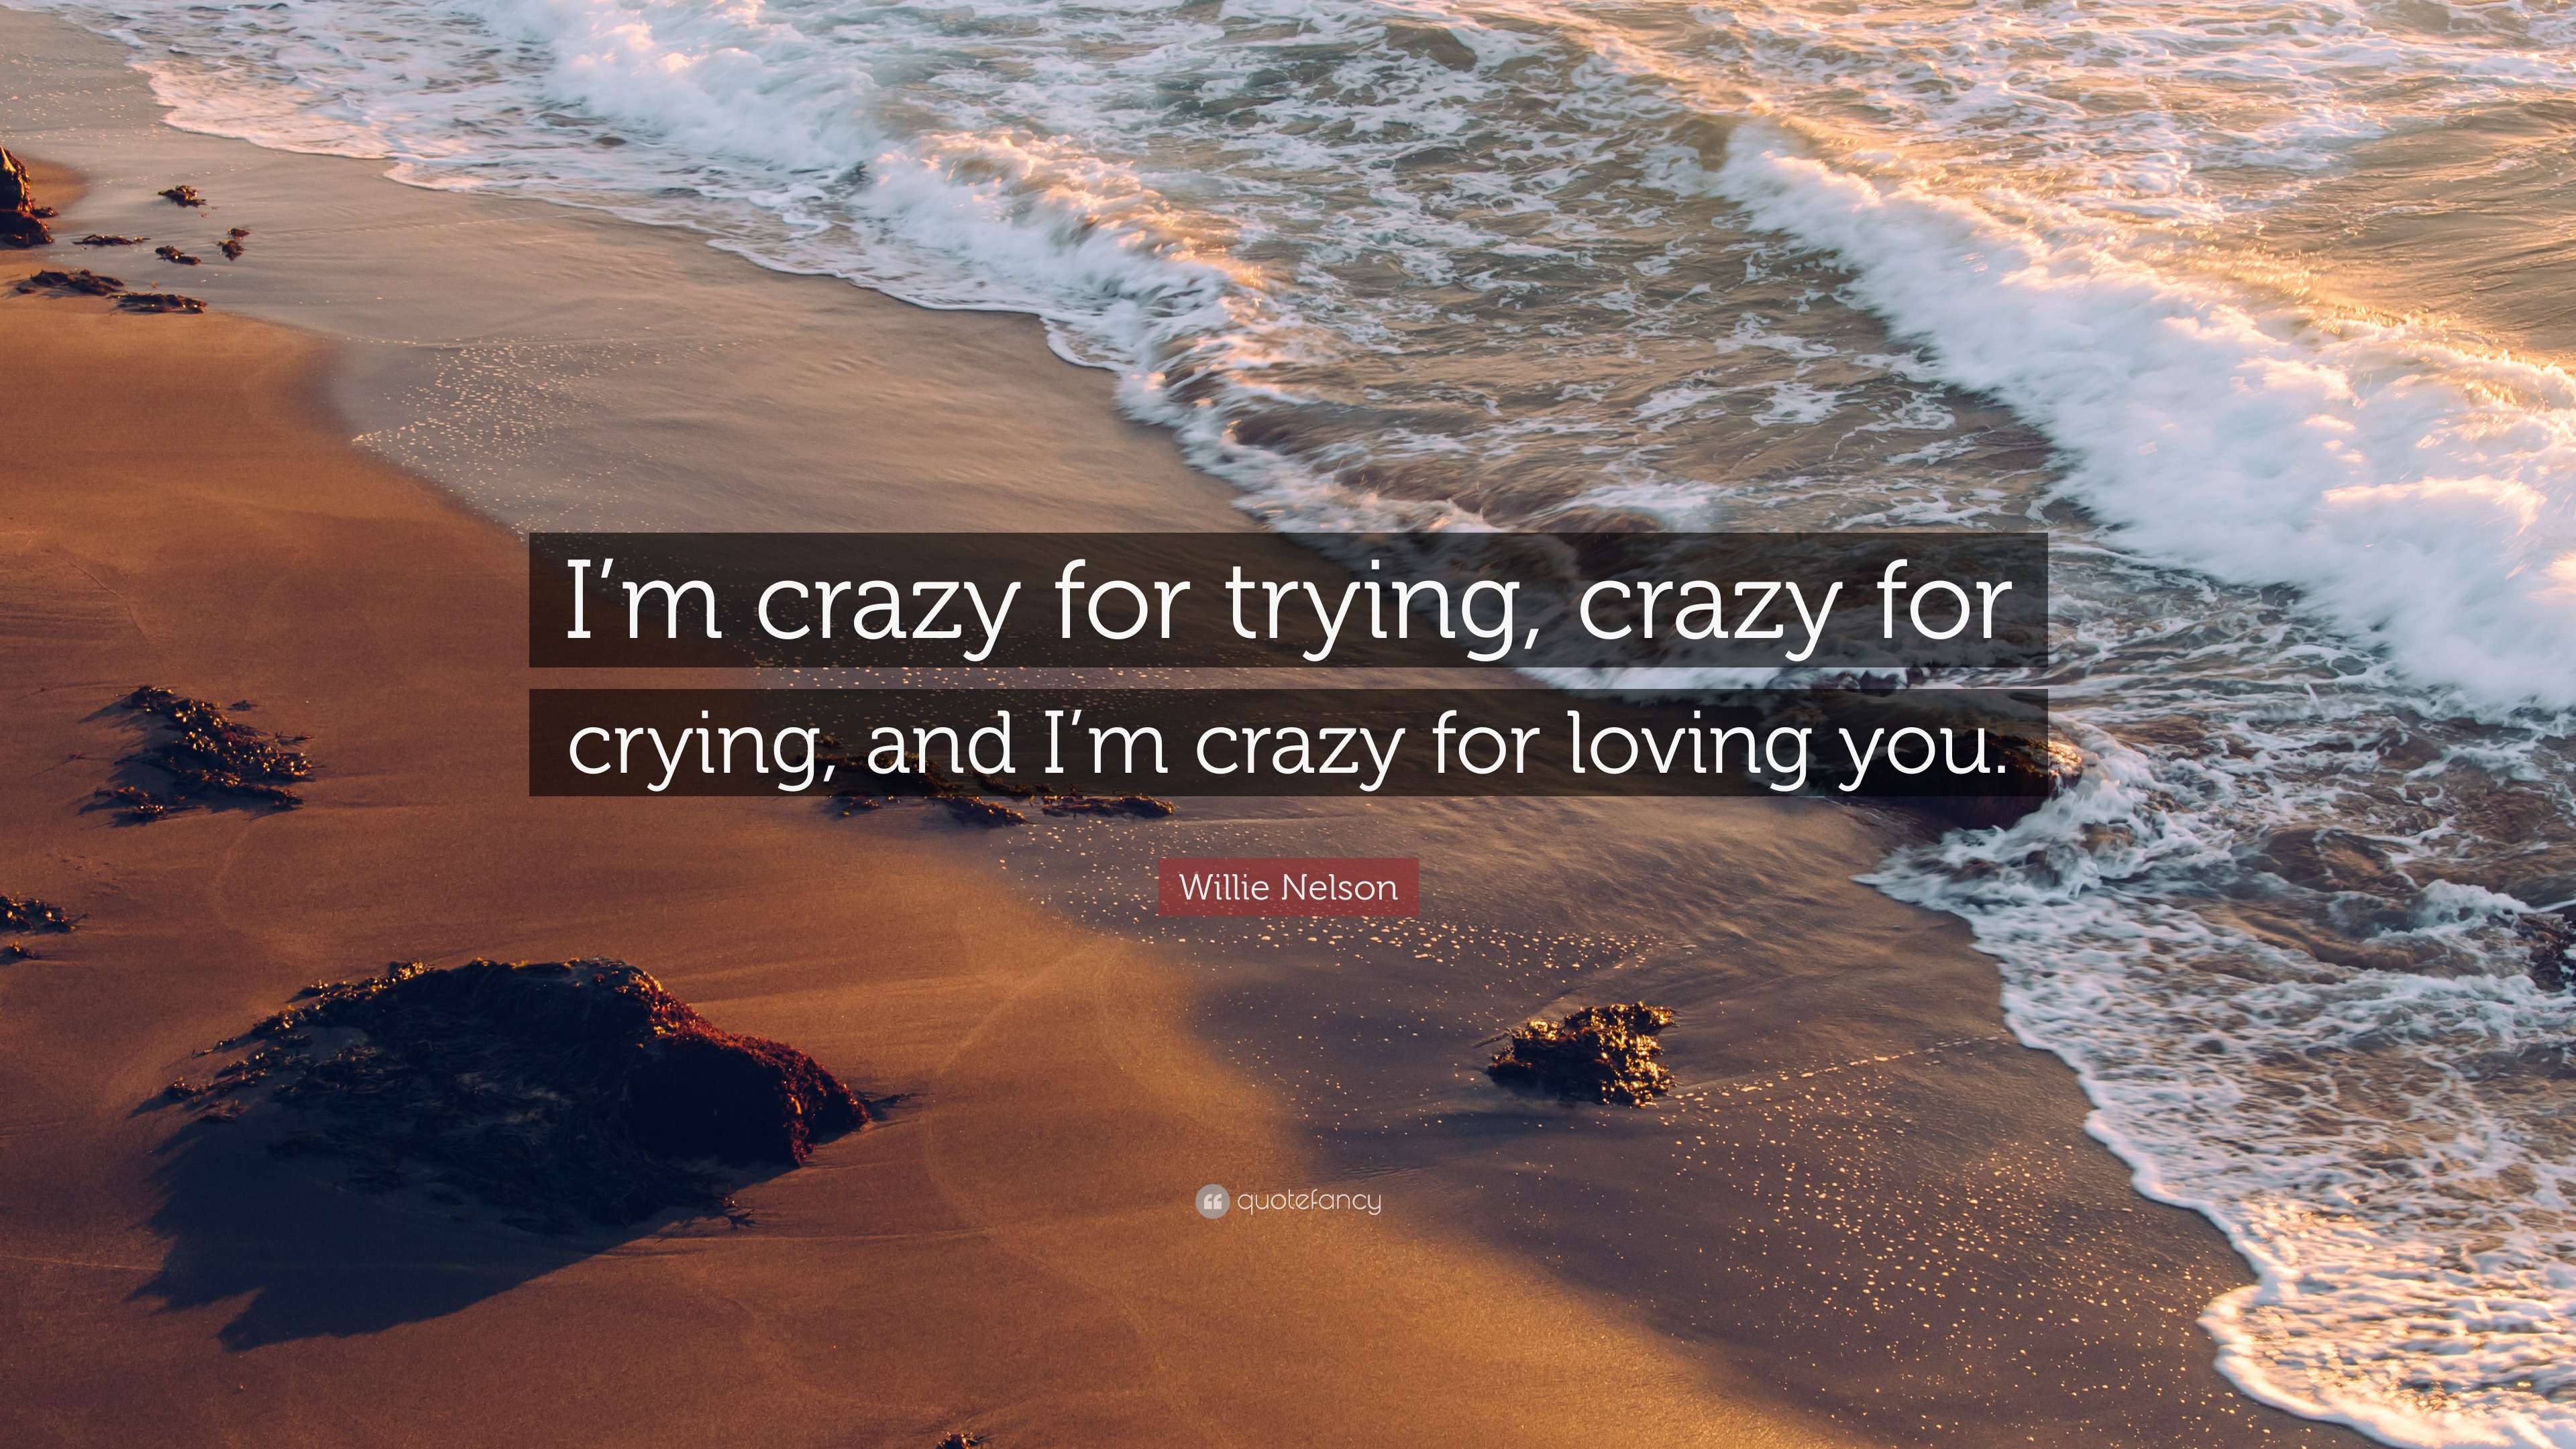 Willie Nelson Quote: "I'm crazy for trying, crazy for ...